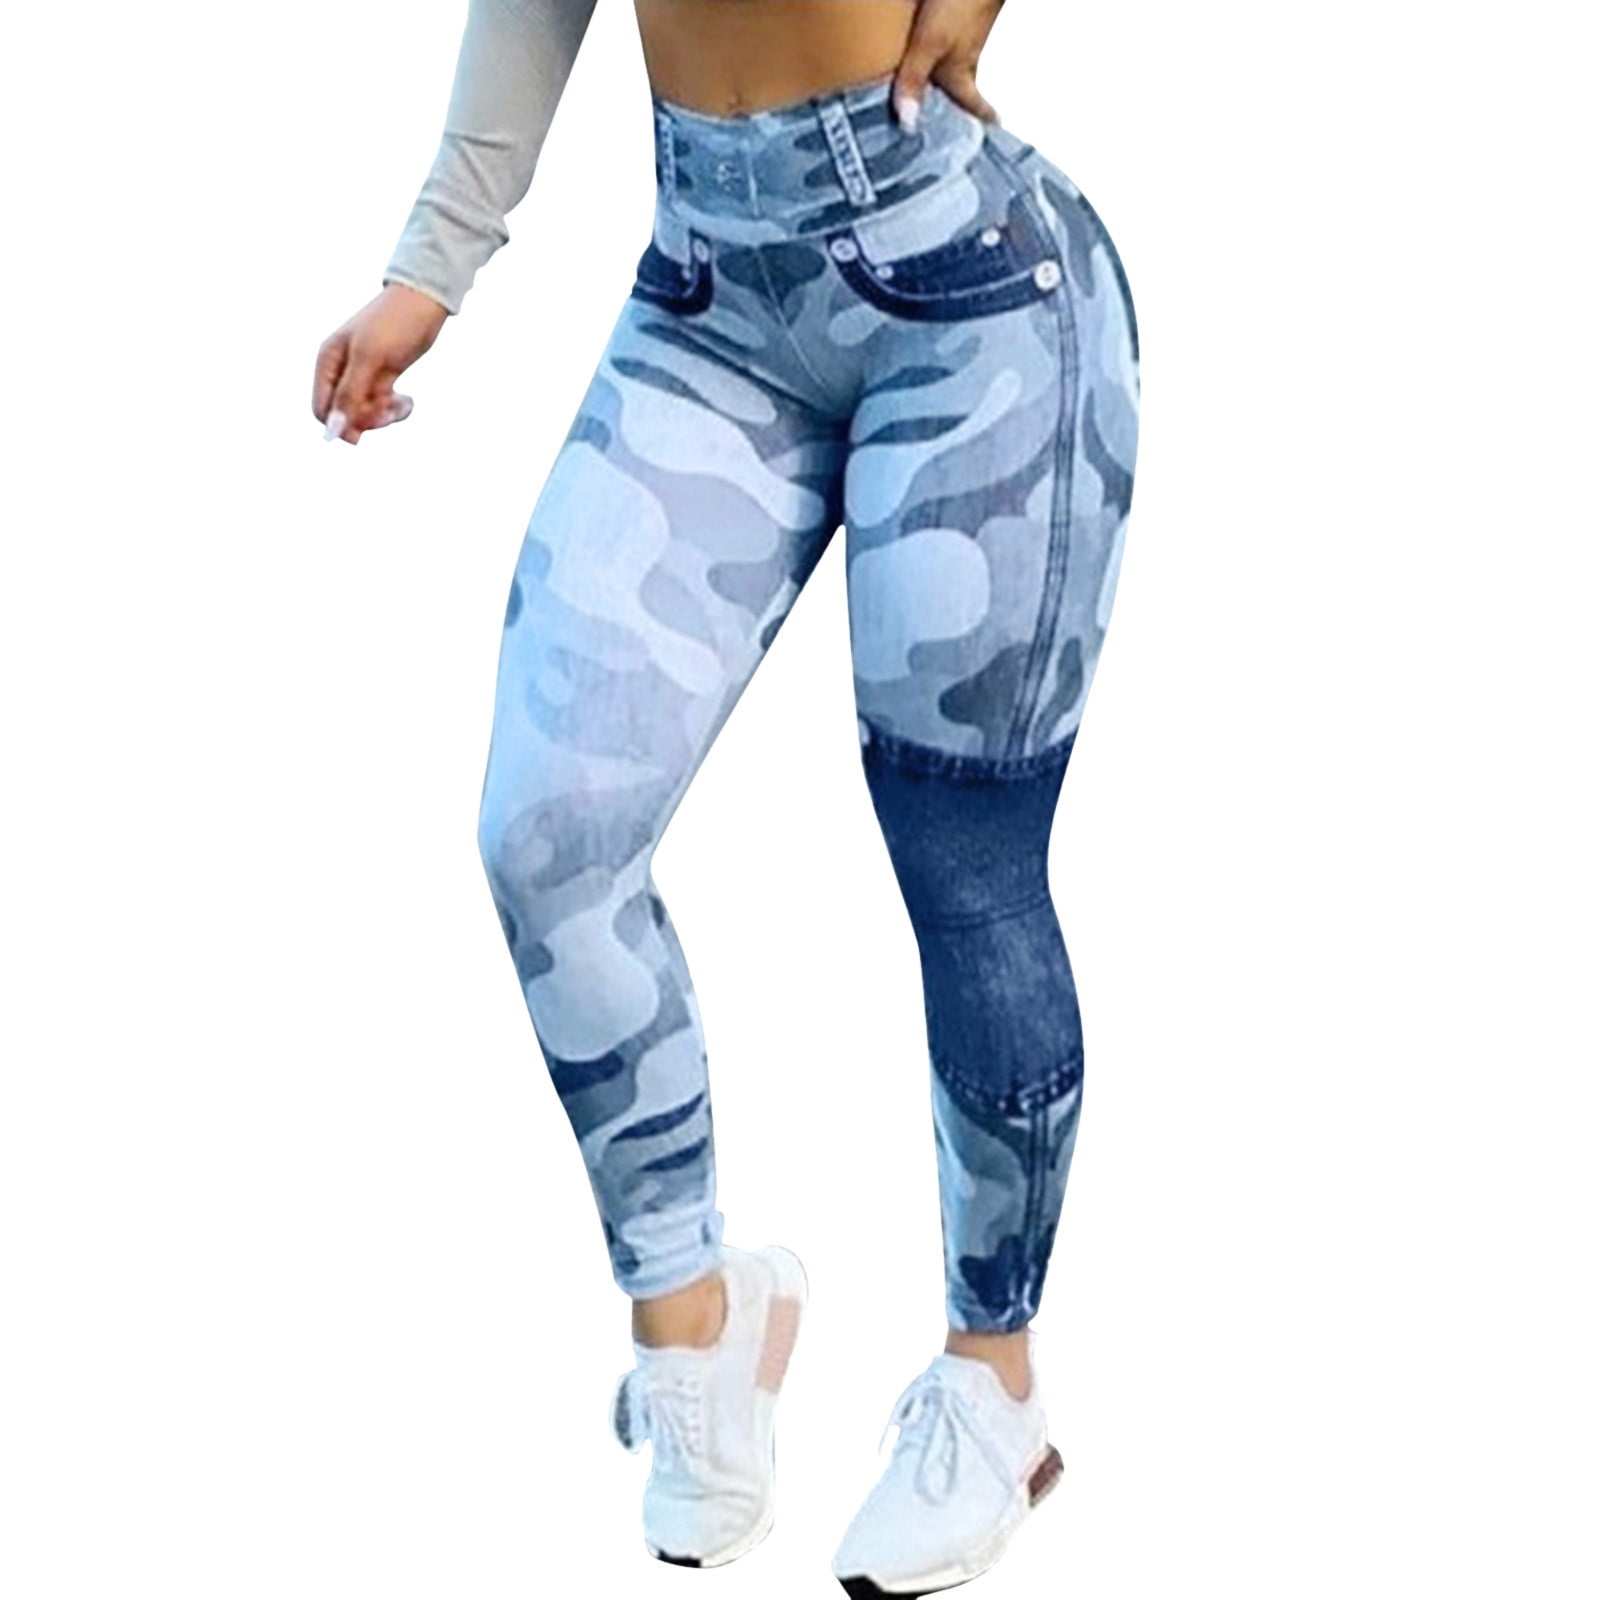 Waist Camouflage 80s Leggings Shorts Women Stitching Slim Jeans Casual fvwitlyh Fit Clothes High Women Button Yoga